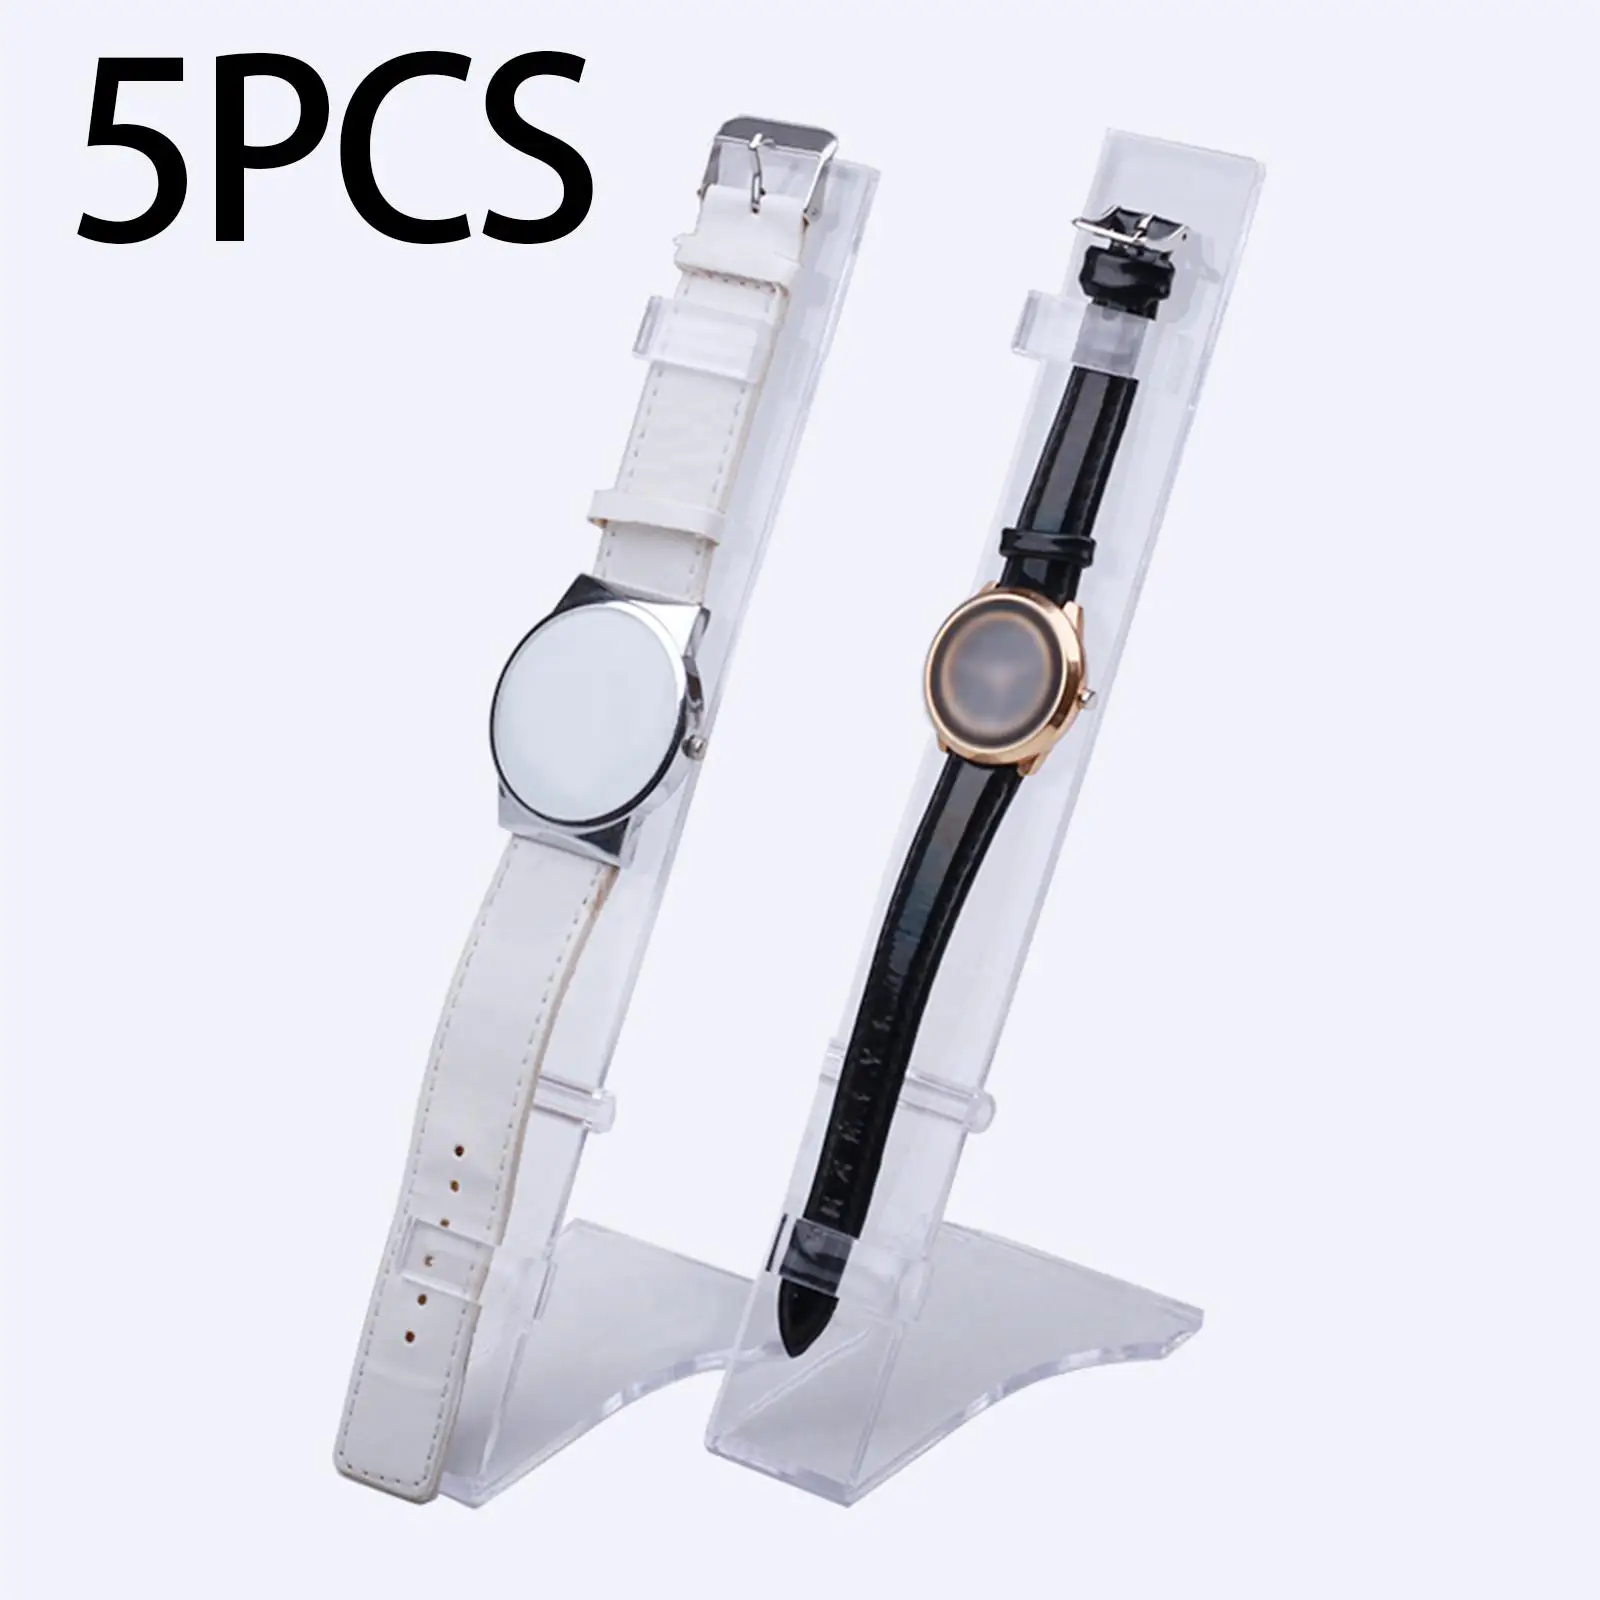 5Pcs Clear Watch Display Stand for Home or Store Usage Showcase Watch Stand